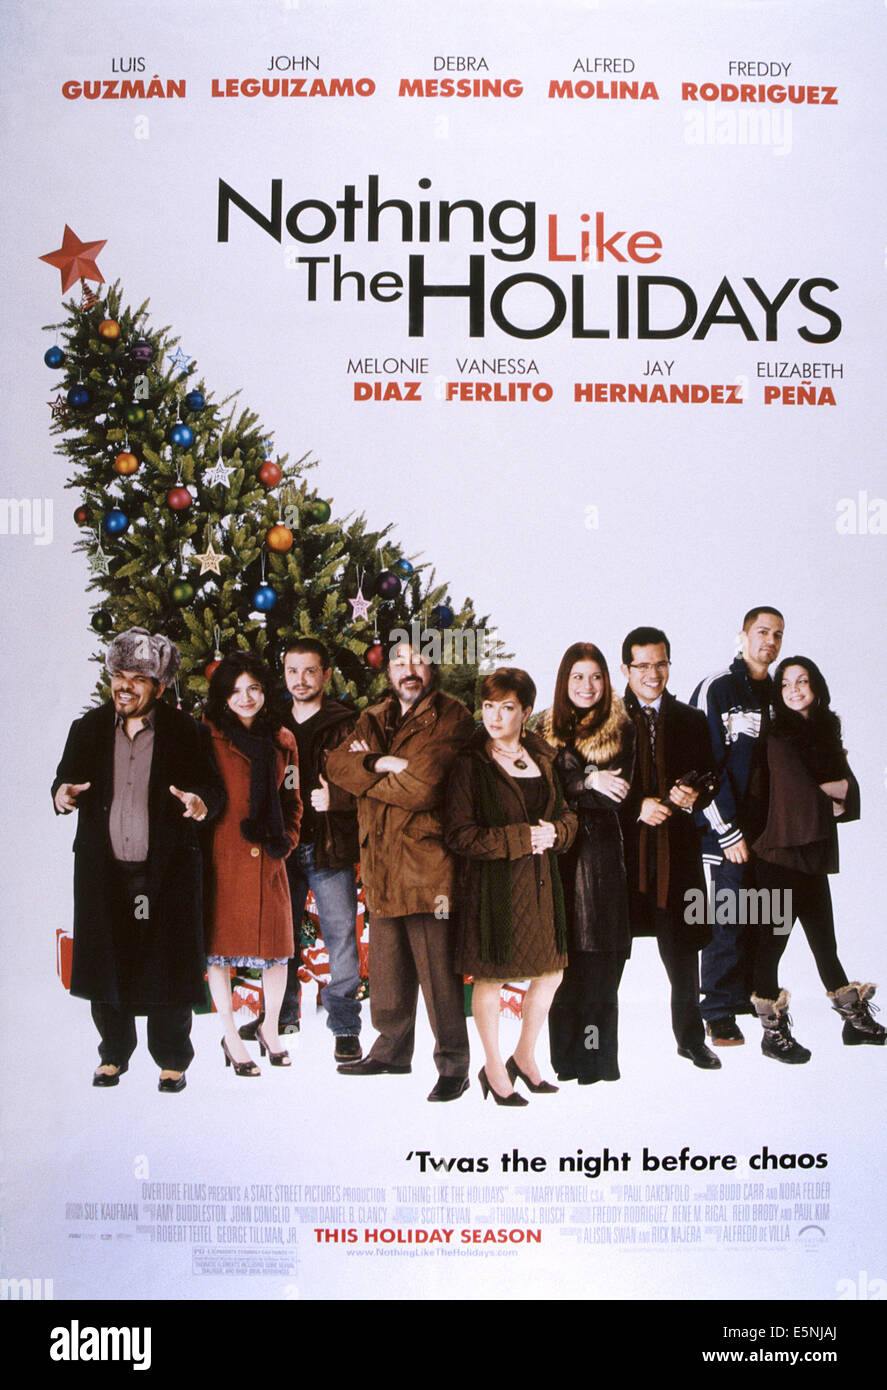 NOTHING LIKE THE HOLIDAYS, US poster, from left: Luis Guzman, Melonie Diaz, Freddy Rodriguez, Alfred Molina, Elizabeth Pena, Stock Photo